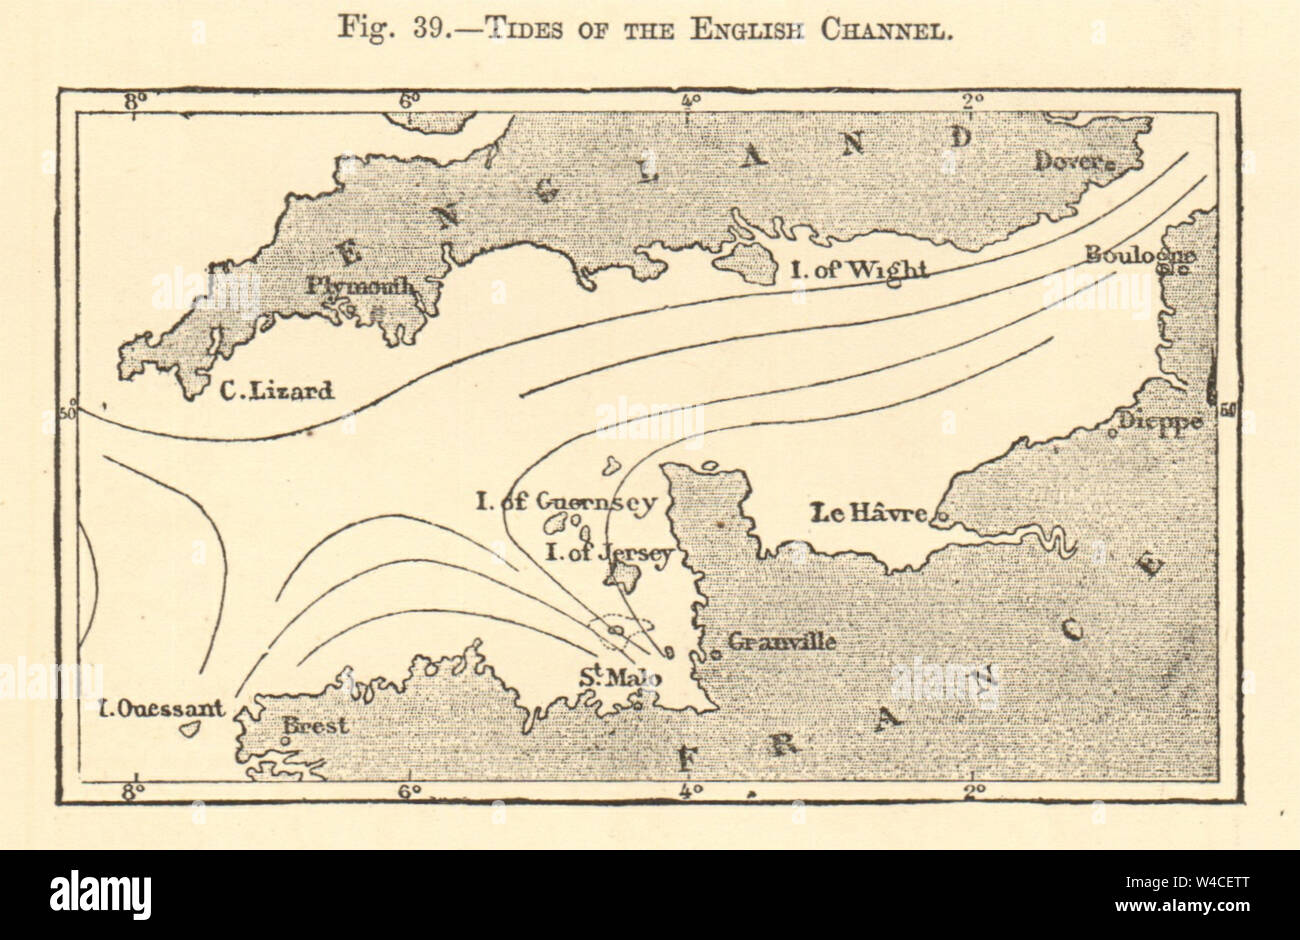 Tides of the English Channel. SMALL sketch map 1886 old antique plan chart Stock Photo